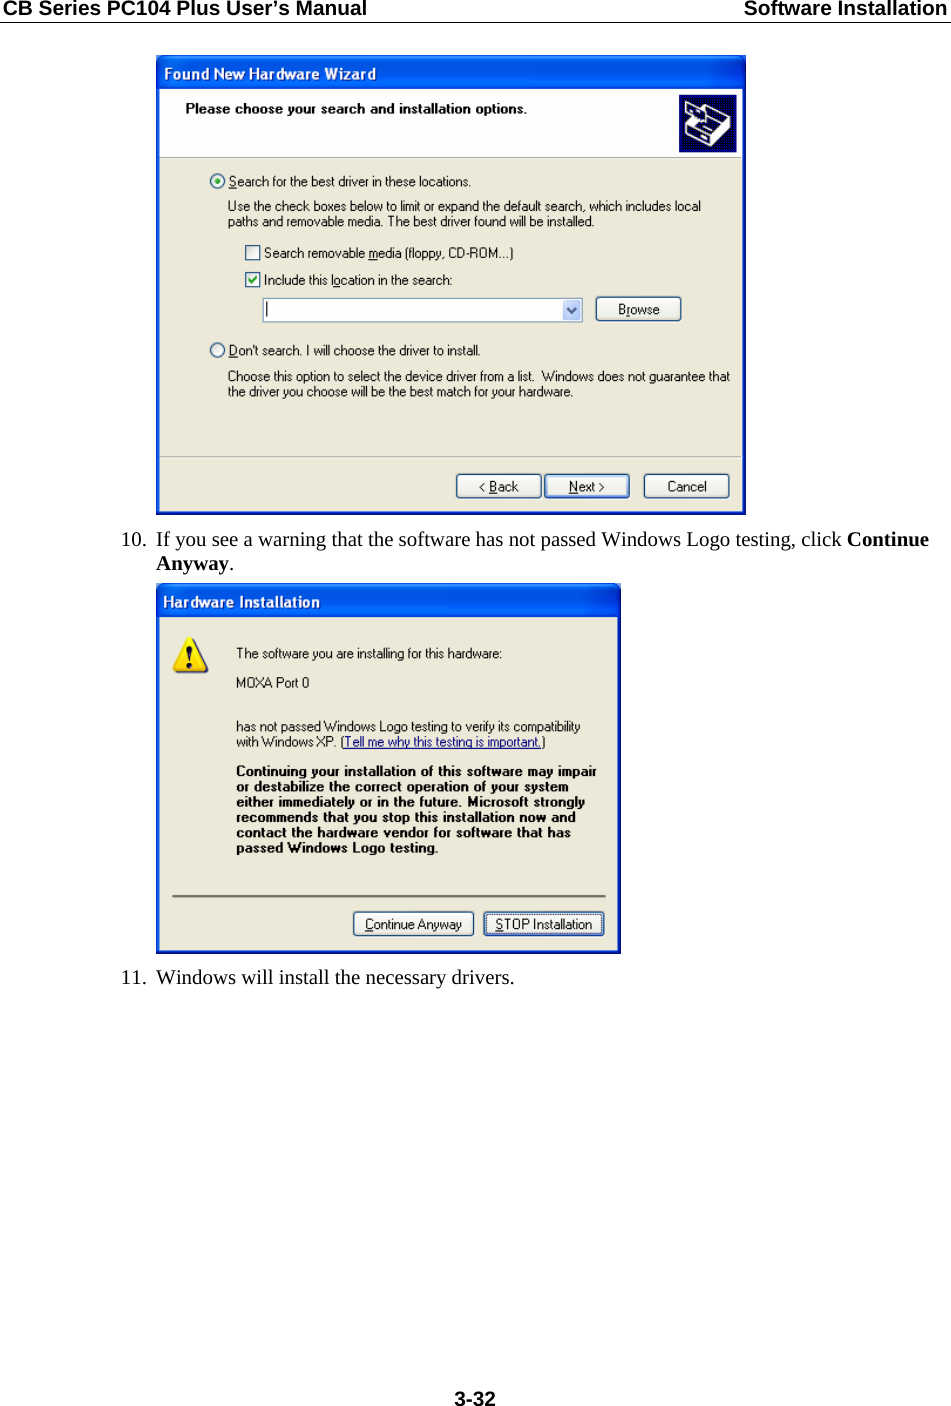 CB Series PC104 Plus User’s Manual  Software Installation  10. If you see a warning that the software has not passed Windows Logo testing, click Continue Anyway.  11. Windows will install the necessary drivers.  3-32